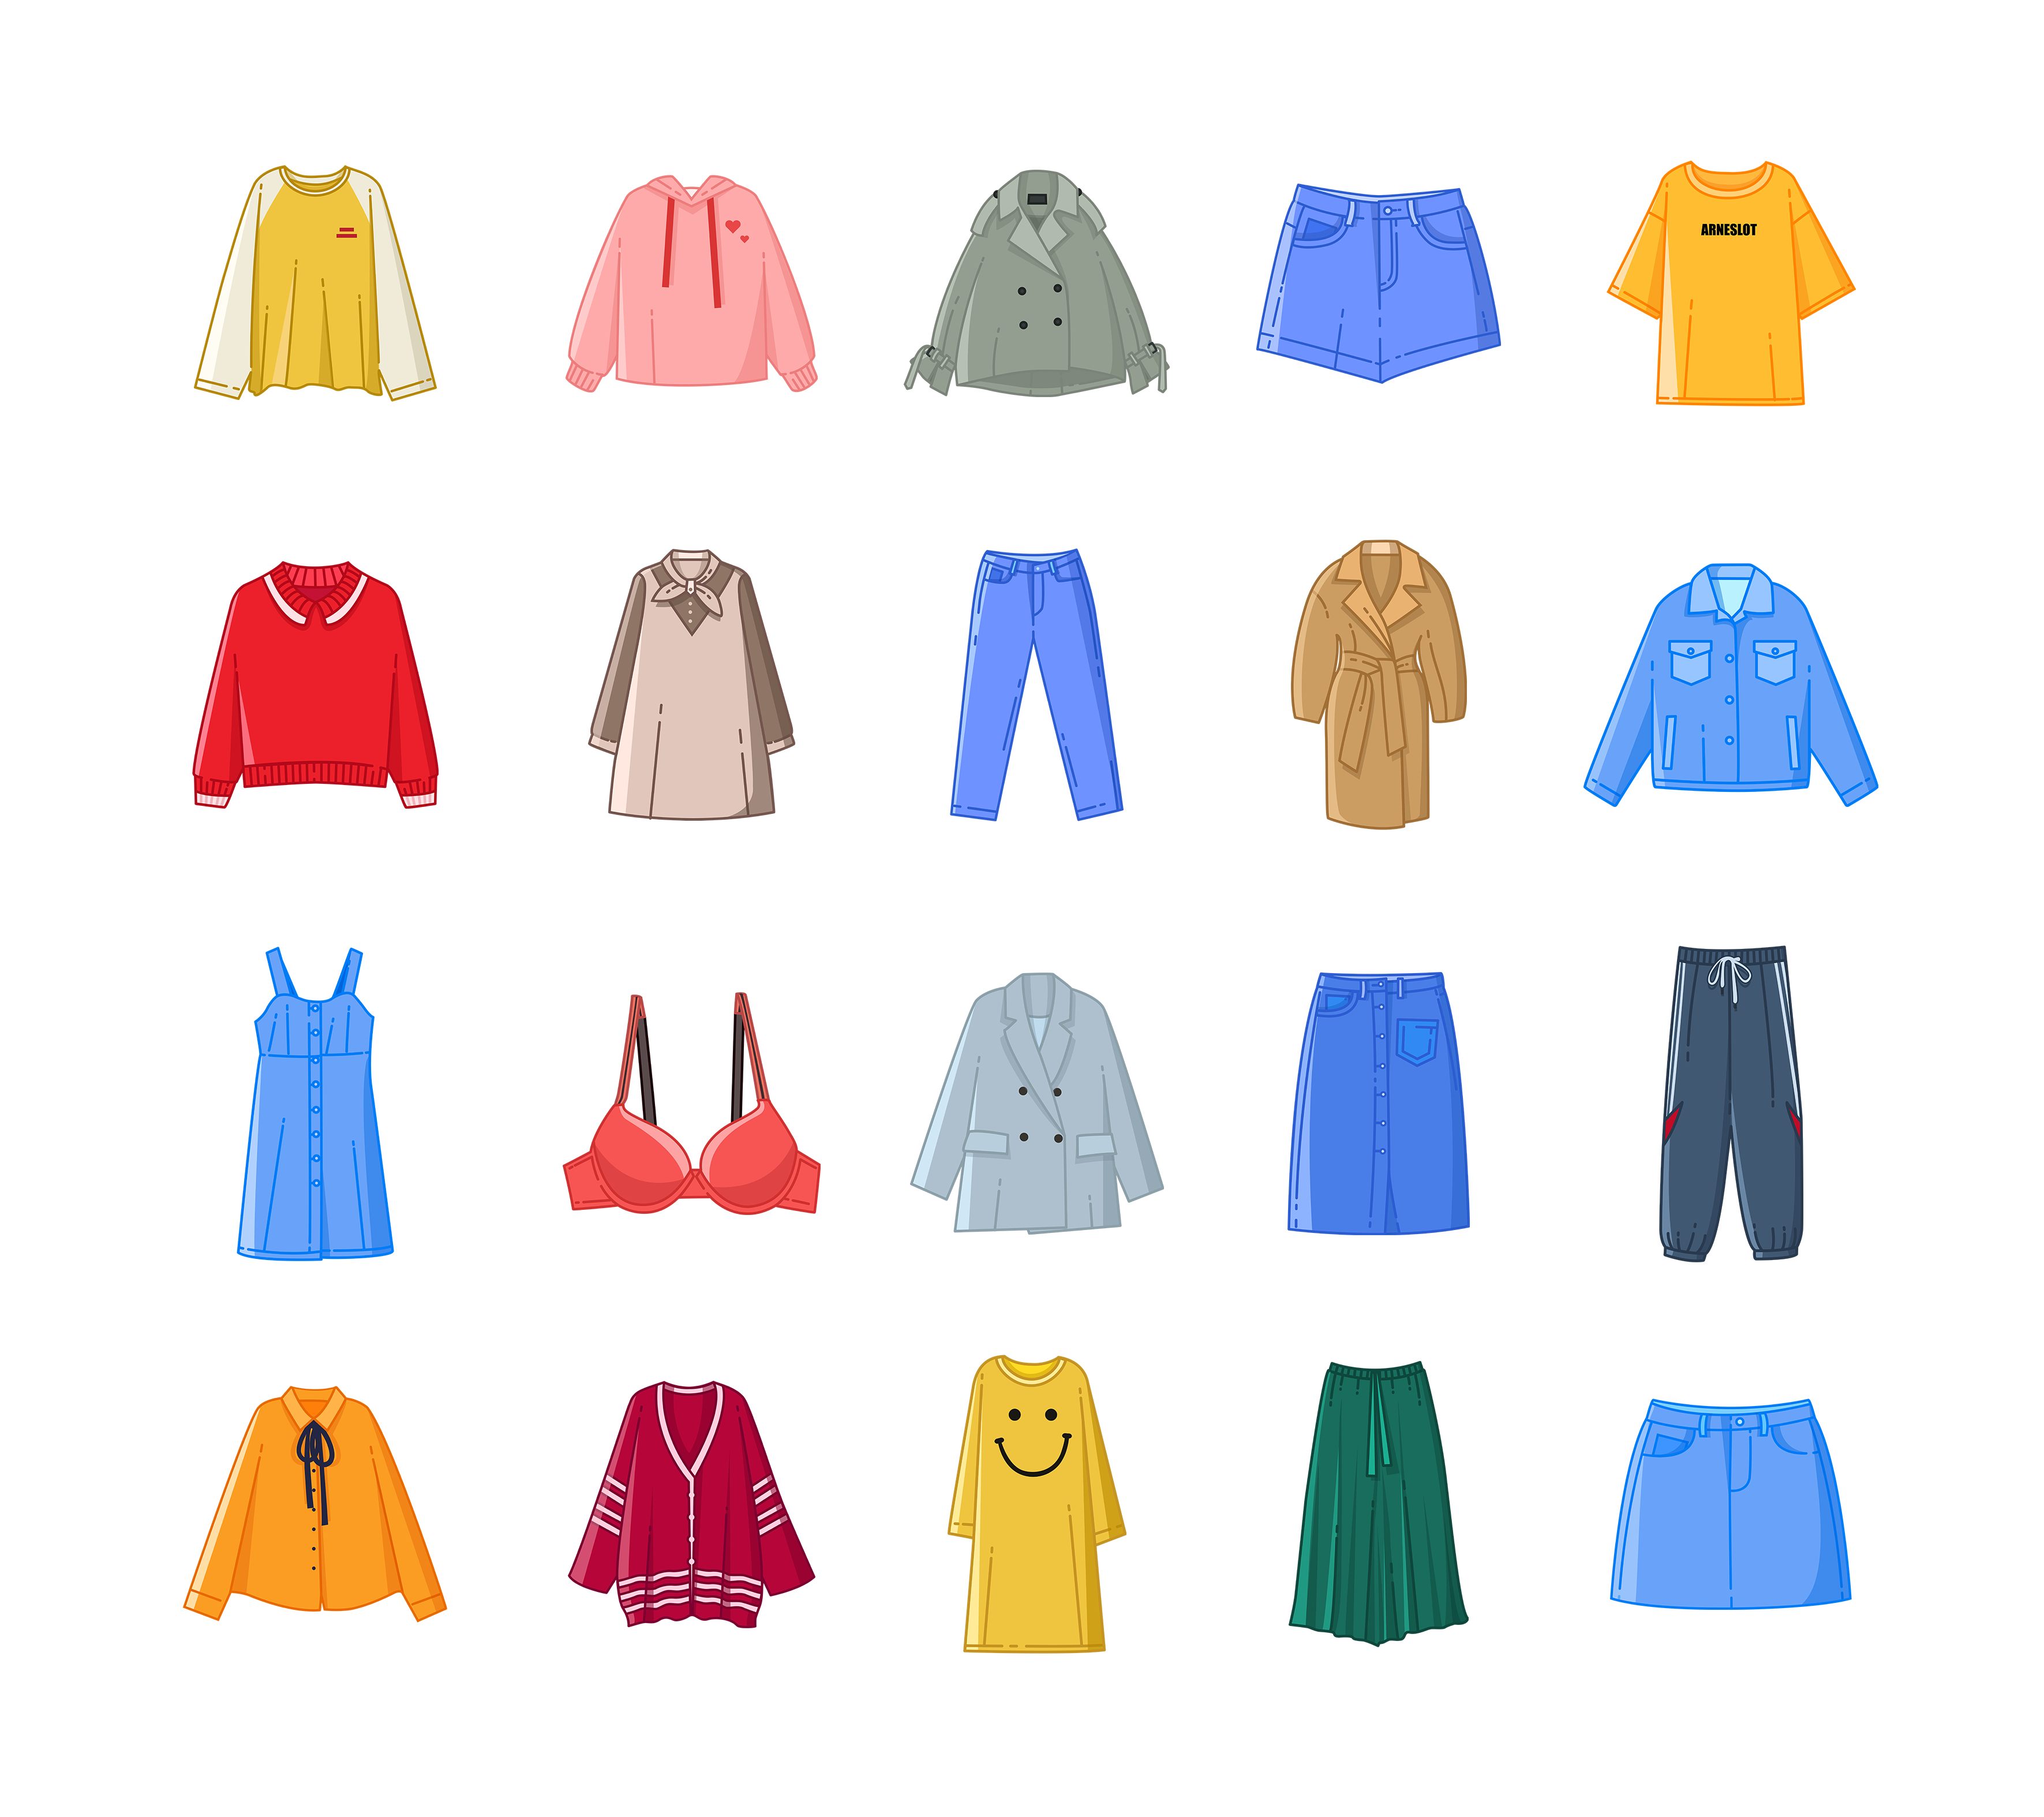 Clothing icon by Breaking bad on Dribbble